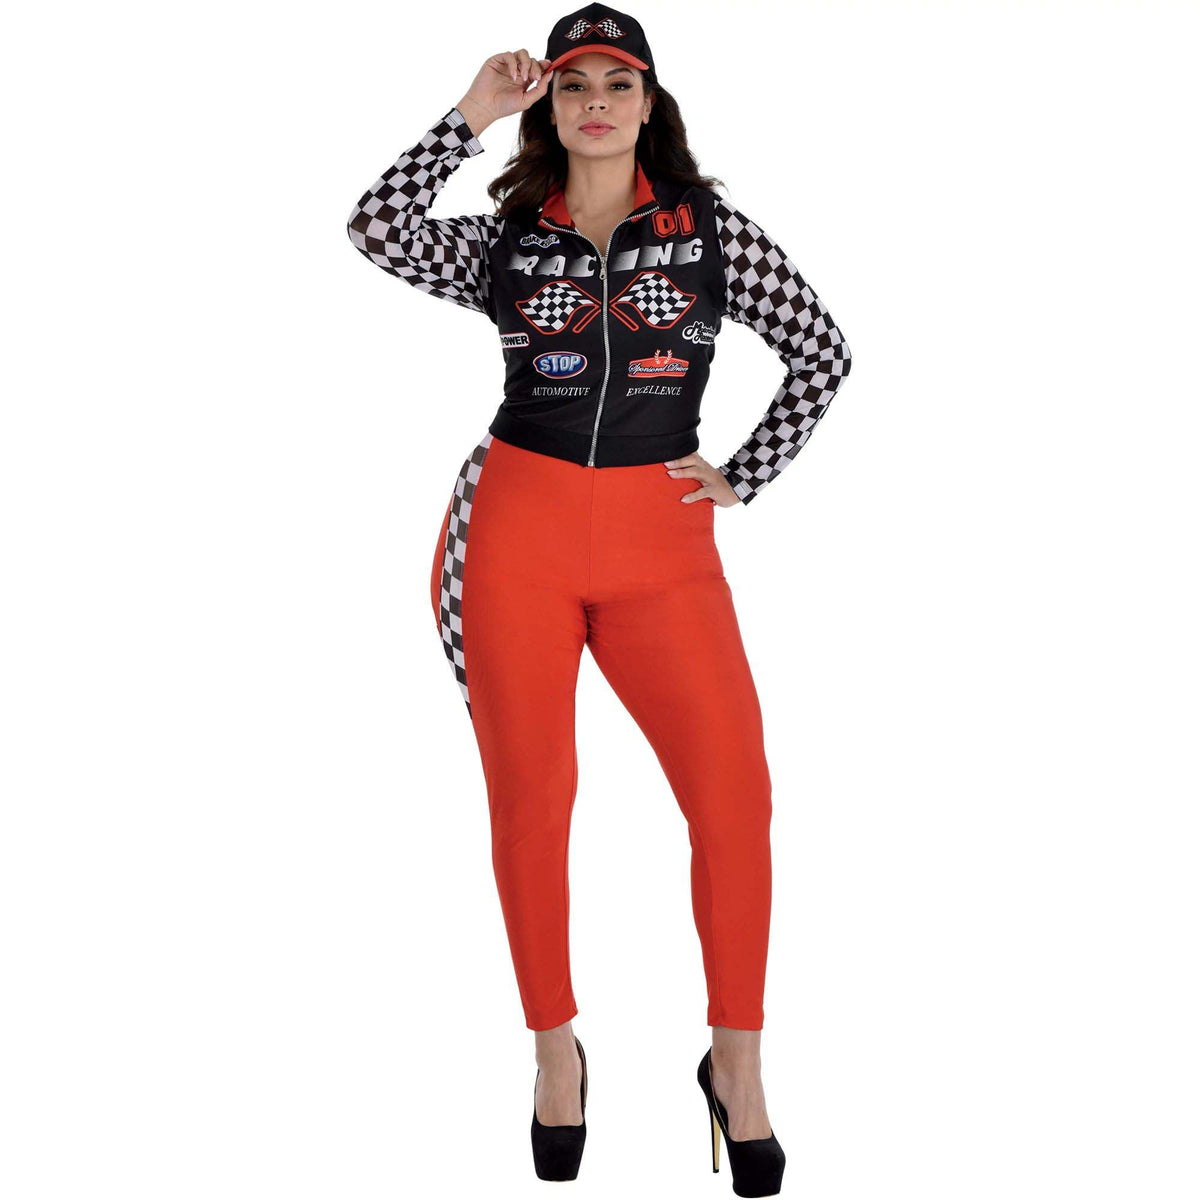 HALLOWEEN COSTUME CO. Costumes Racecar Driver Costume for Plus Size Adults, Jacket and Leggings 192937460689